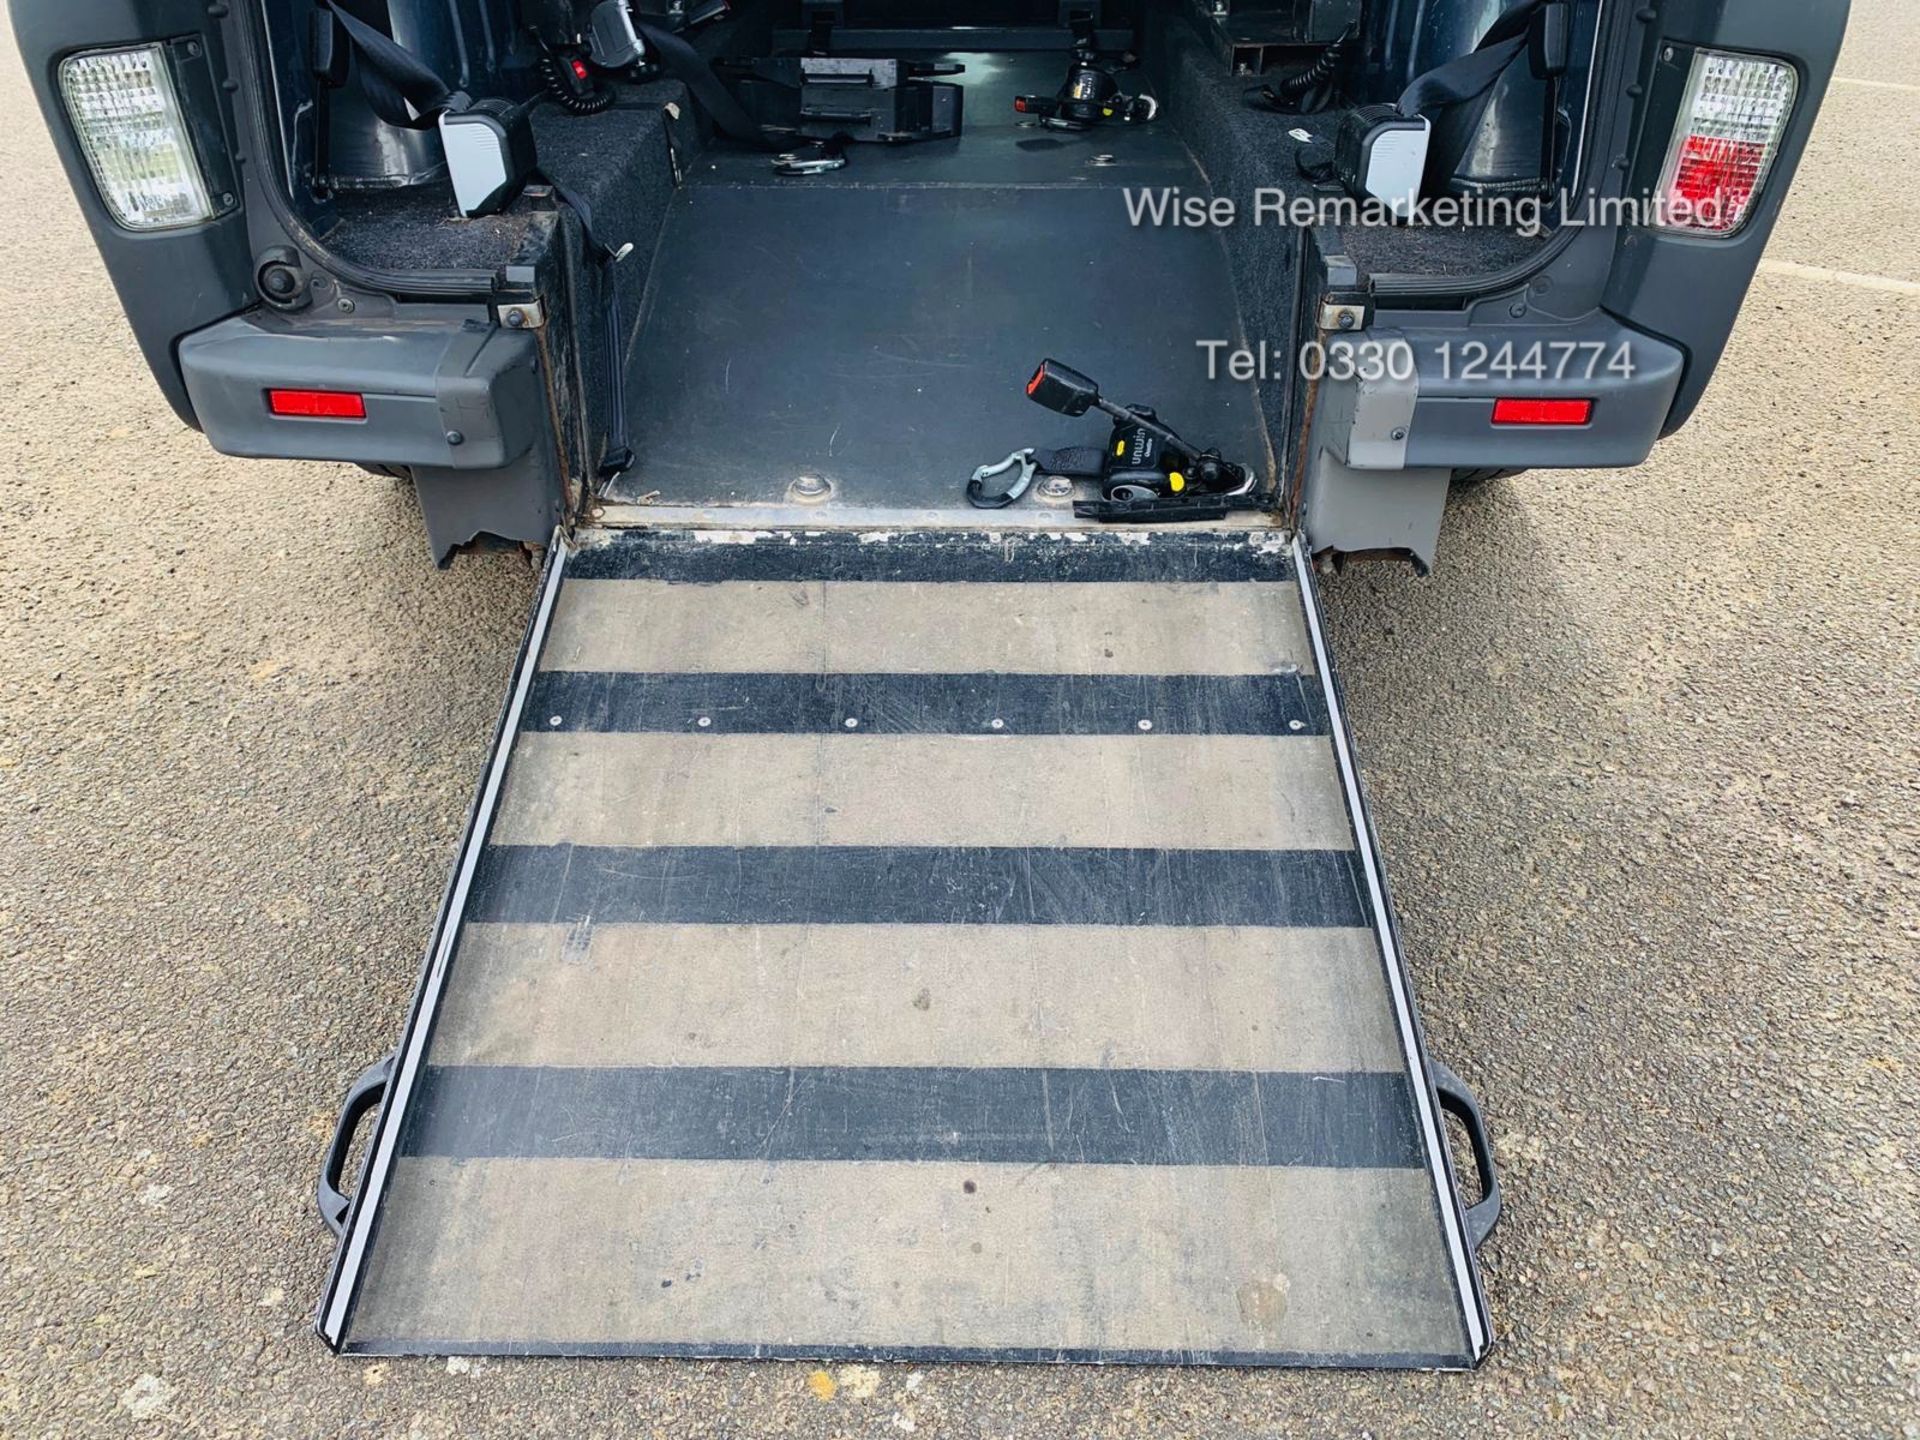 Vauxhall Vivaro 2.0 CDTI 2900 Minibus - 2014 Model - Wheel Chair Access -1 Owner From New -History - Image 9 of 21